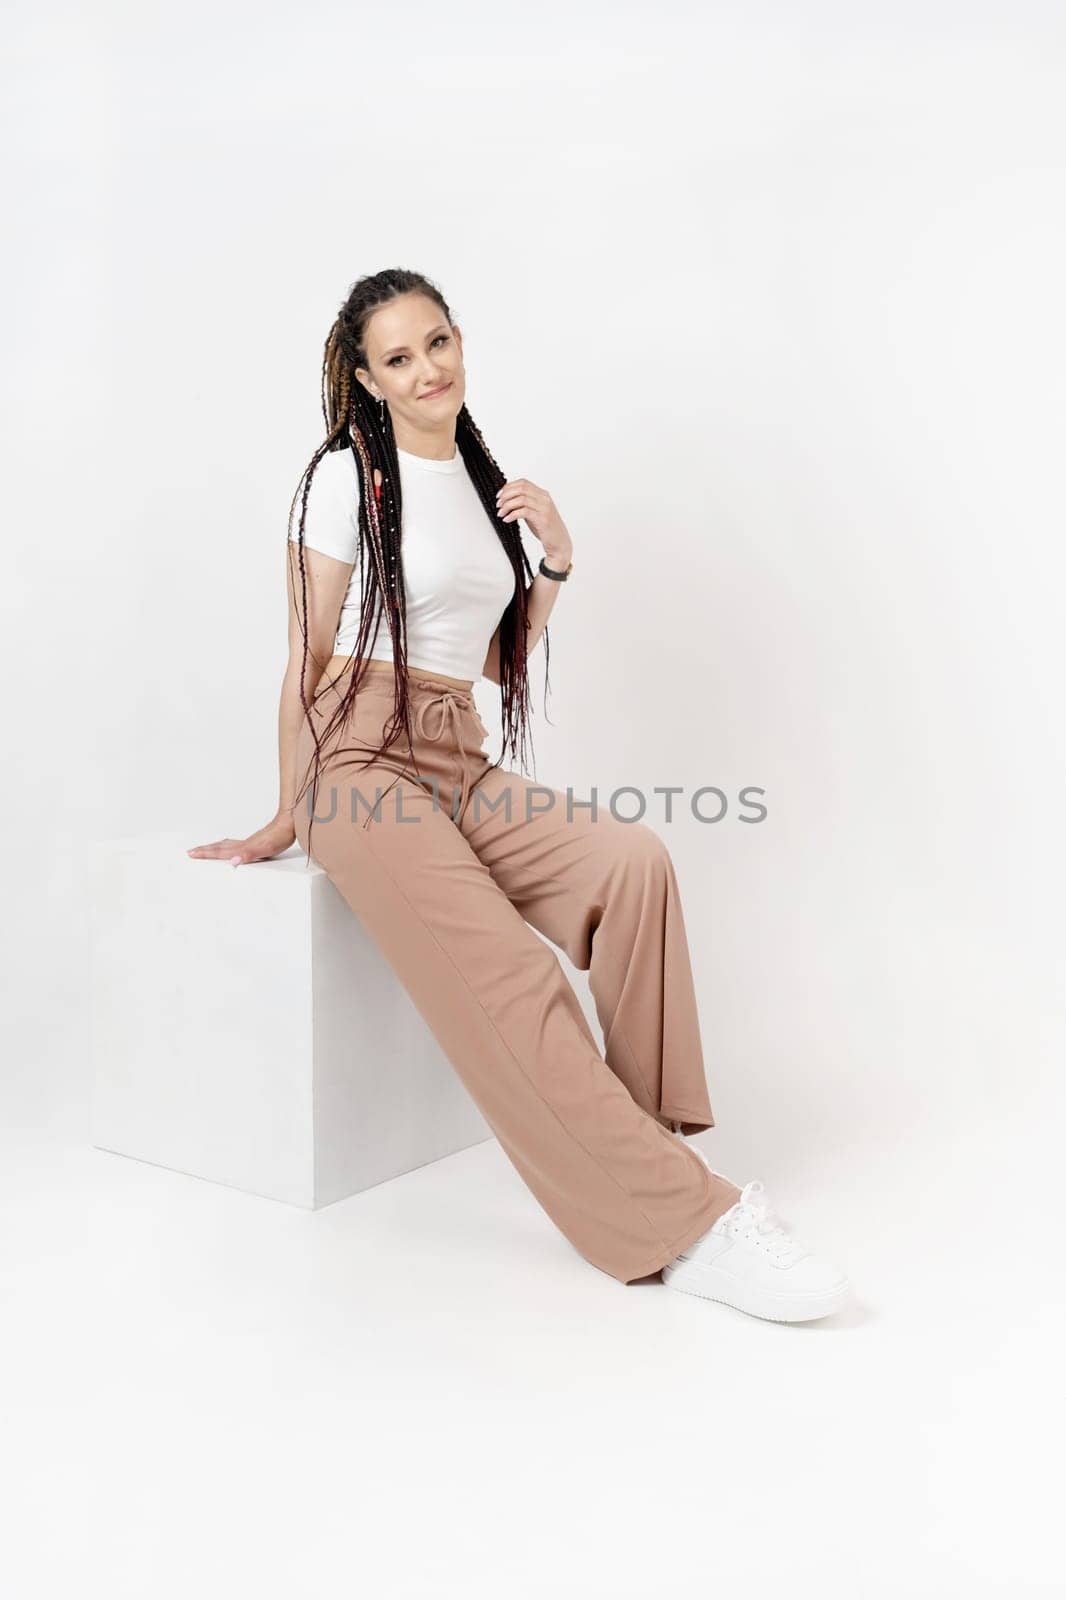 Fashionable young beautiful woman. Slim girl with dreadlocks in an active pose in a white pants and top. Fashion, clothing and style.